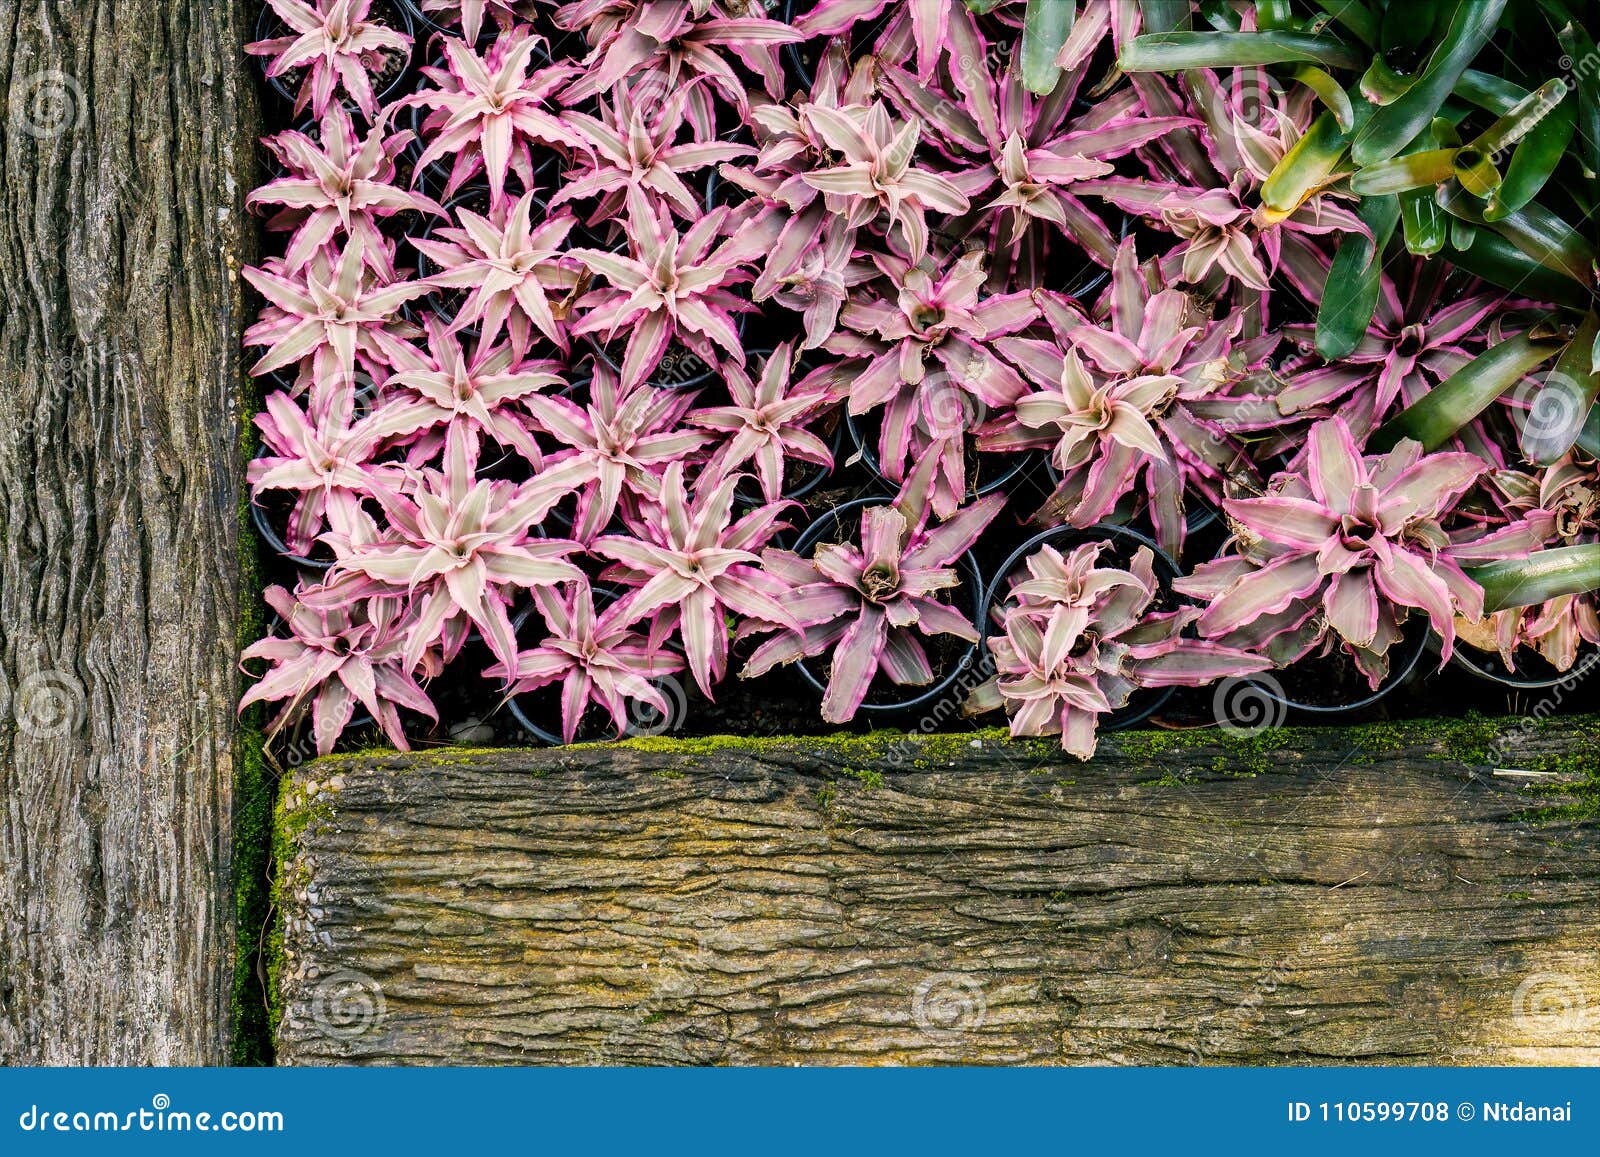 65 Cryptanthus Plant Photos Free Royalty Free Stock Photos From Dreamstime